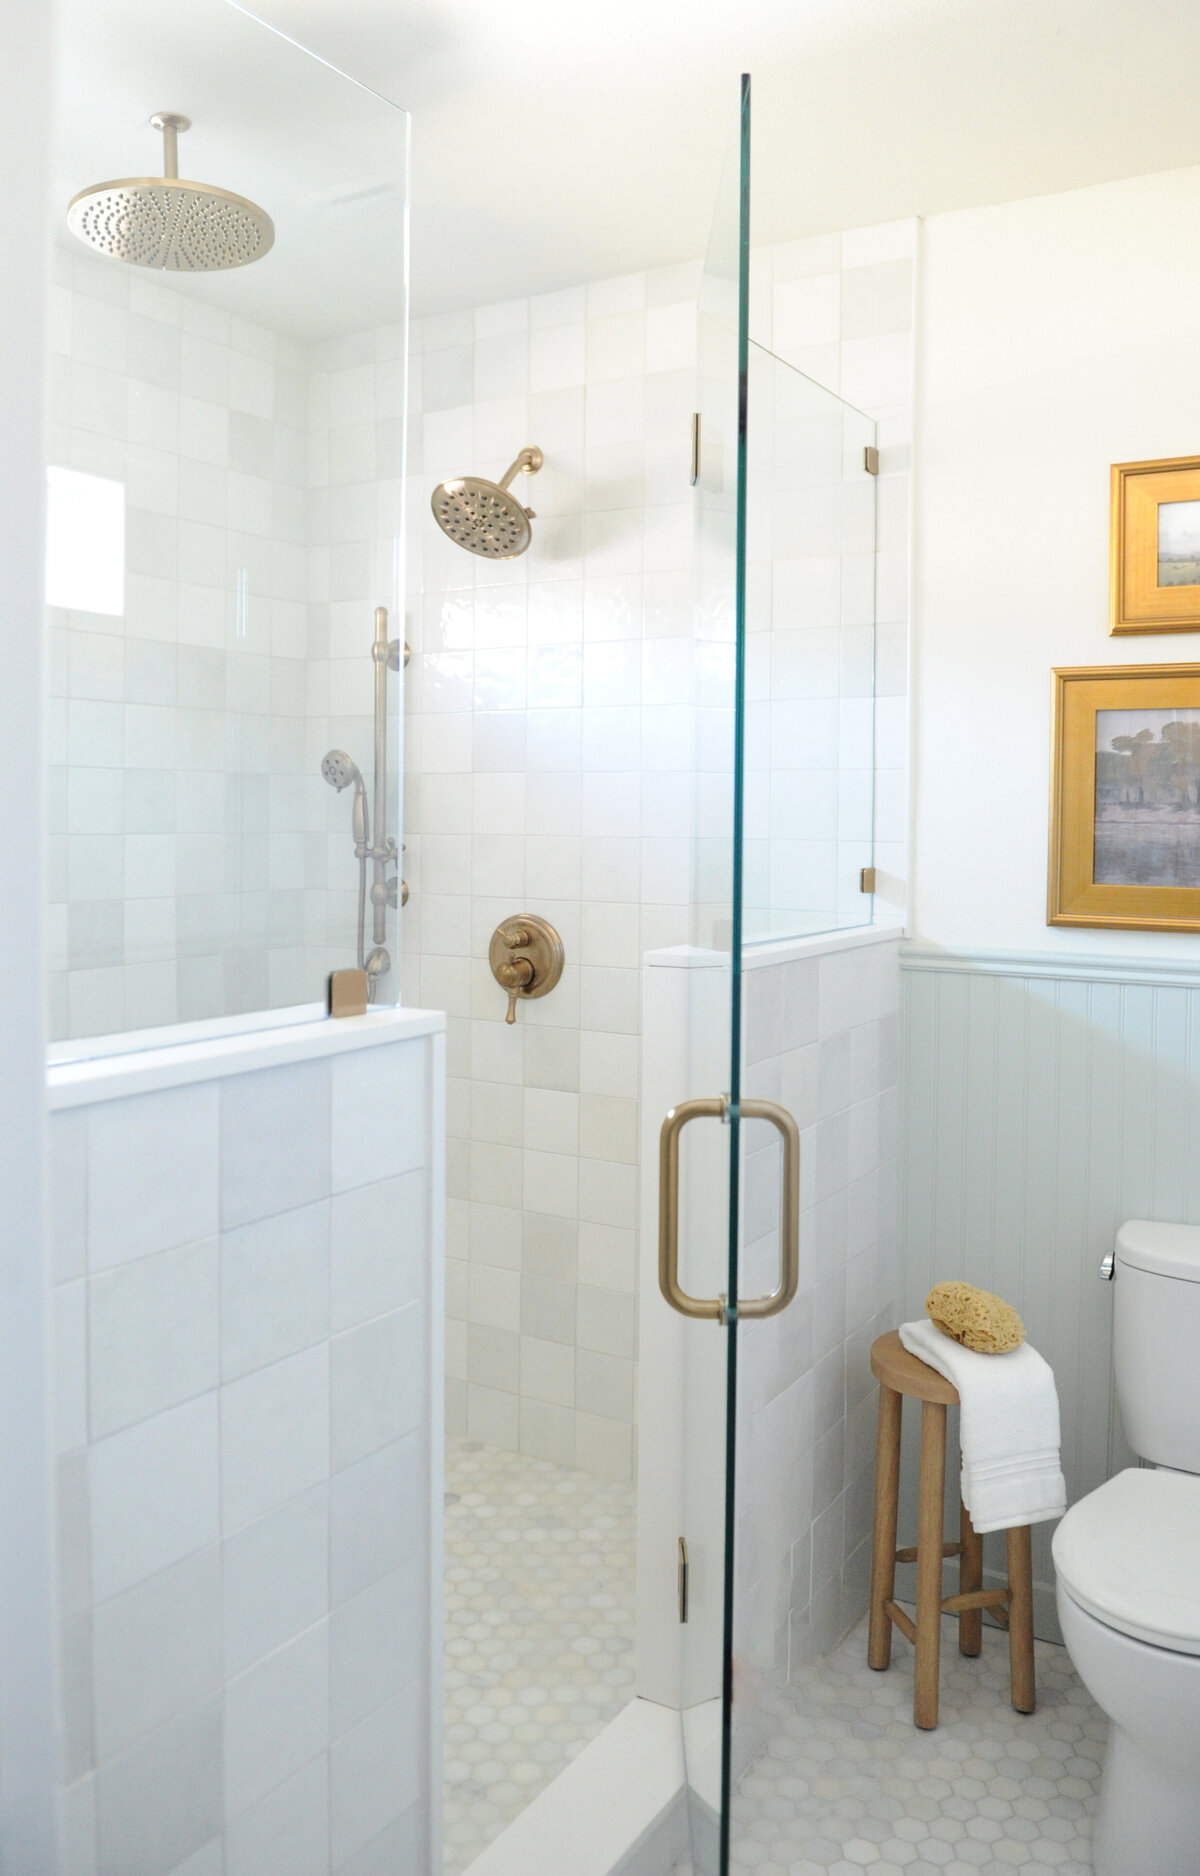 Glass shower with brass plumbing fixtures and rain shower head, wooden stool, and gold framed landscape paintings